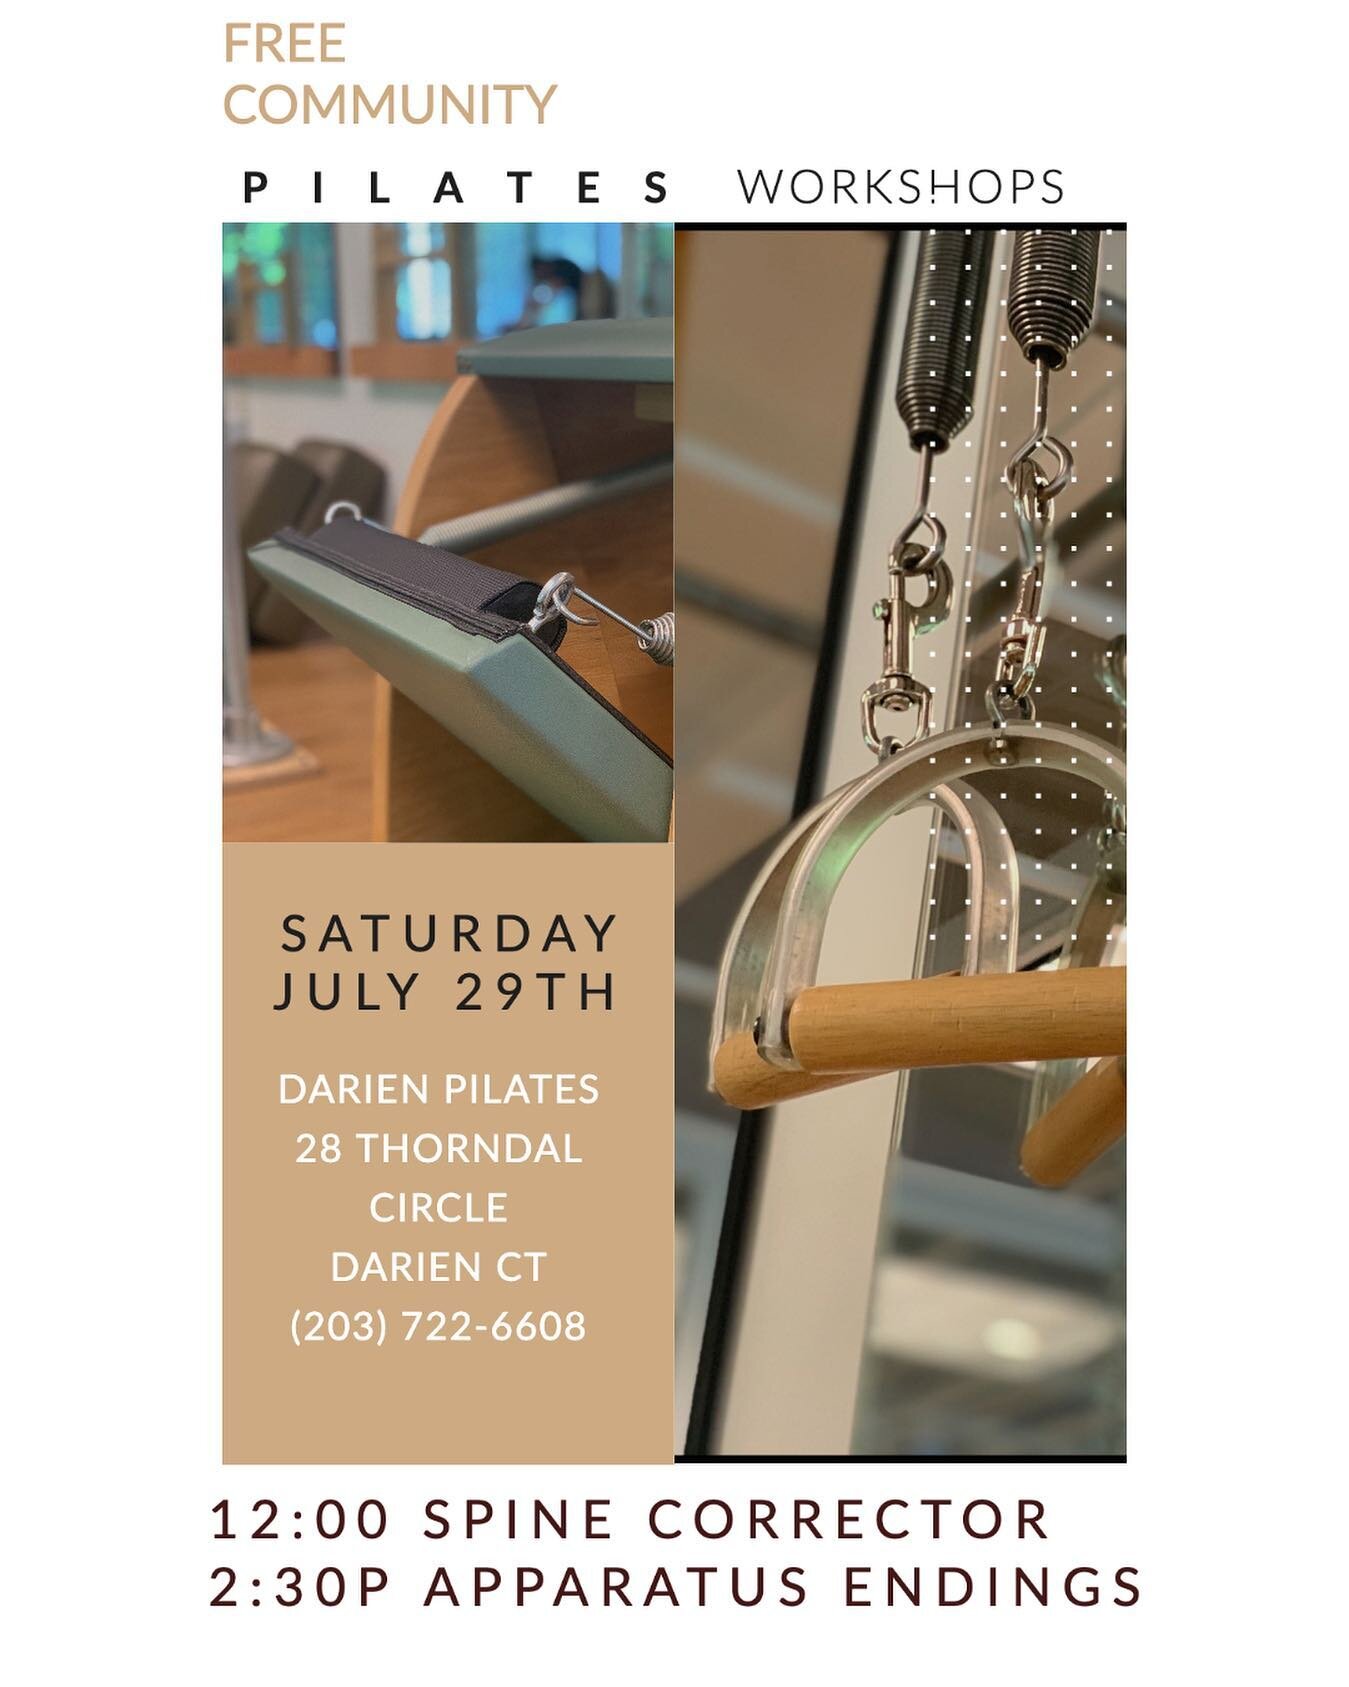 We continue our Free Pilates Community Project @darienpilates in Connecticut Saturday July 29th 12pm-2:30pm.

Workshops include the Spine Corrector and Endings (what should I teach at the end a lesson?) on multiple pieces of apparatus.

Our goal is t